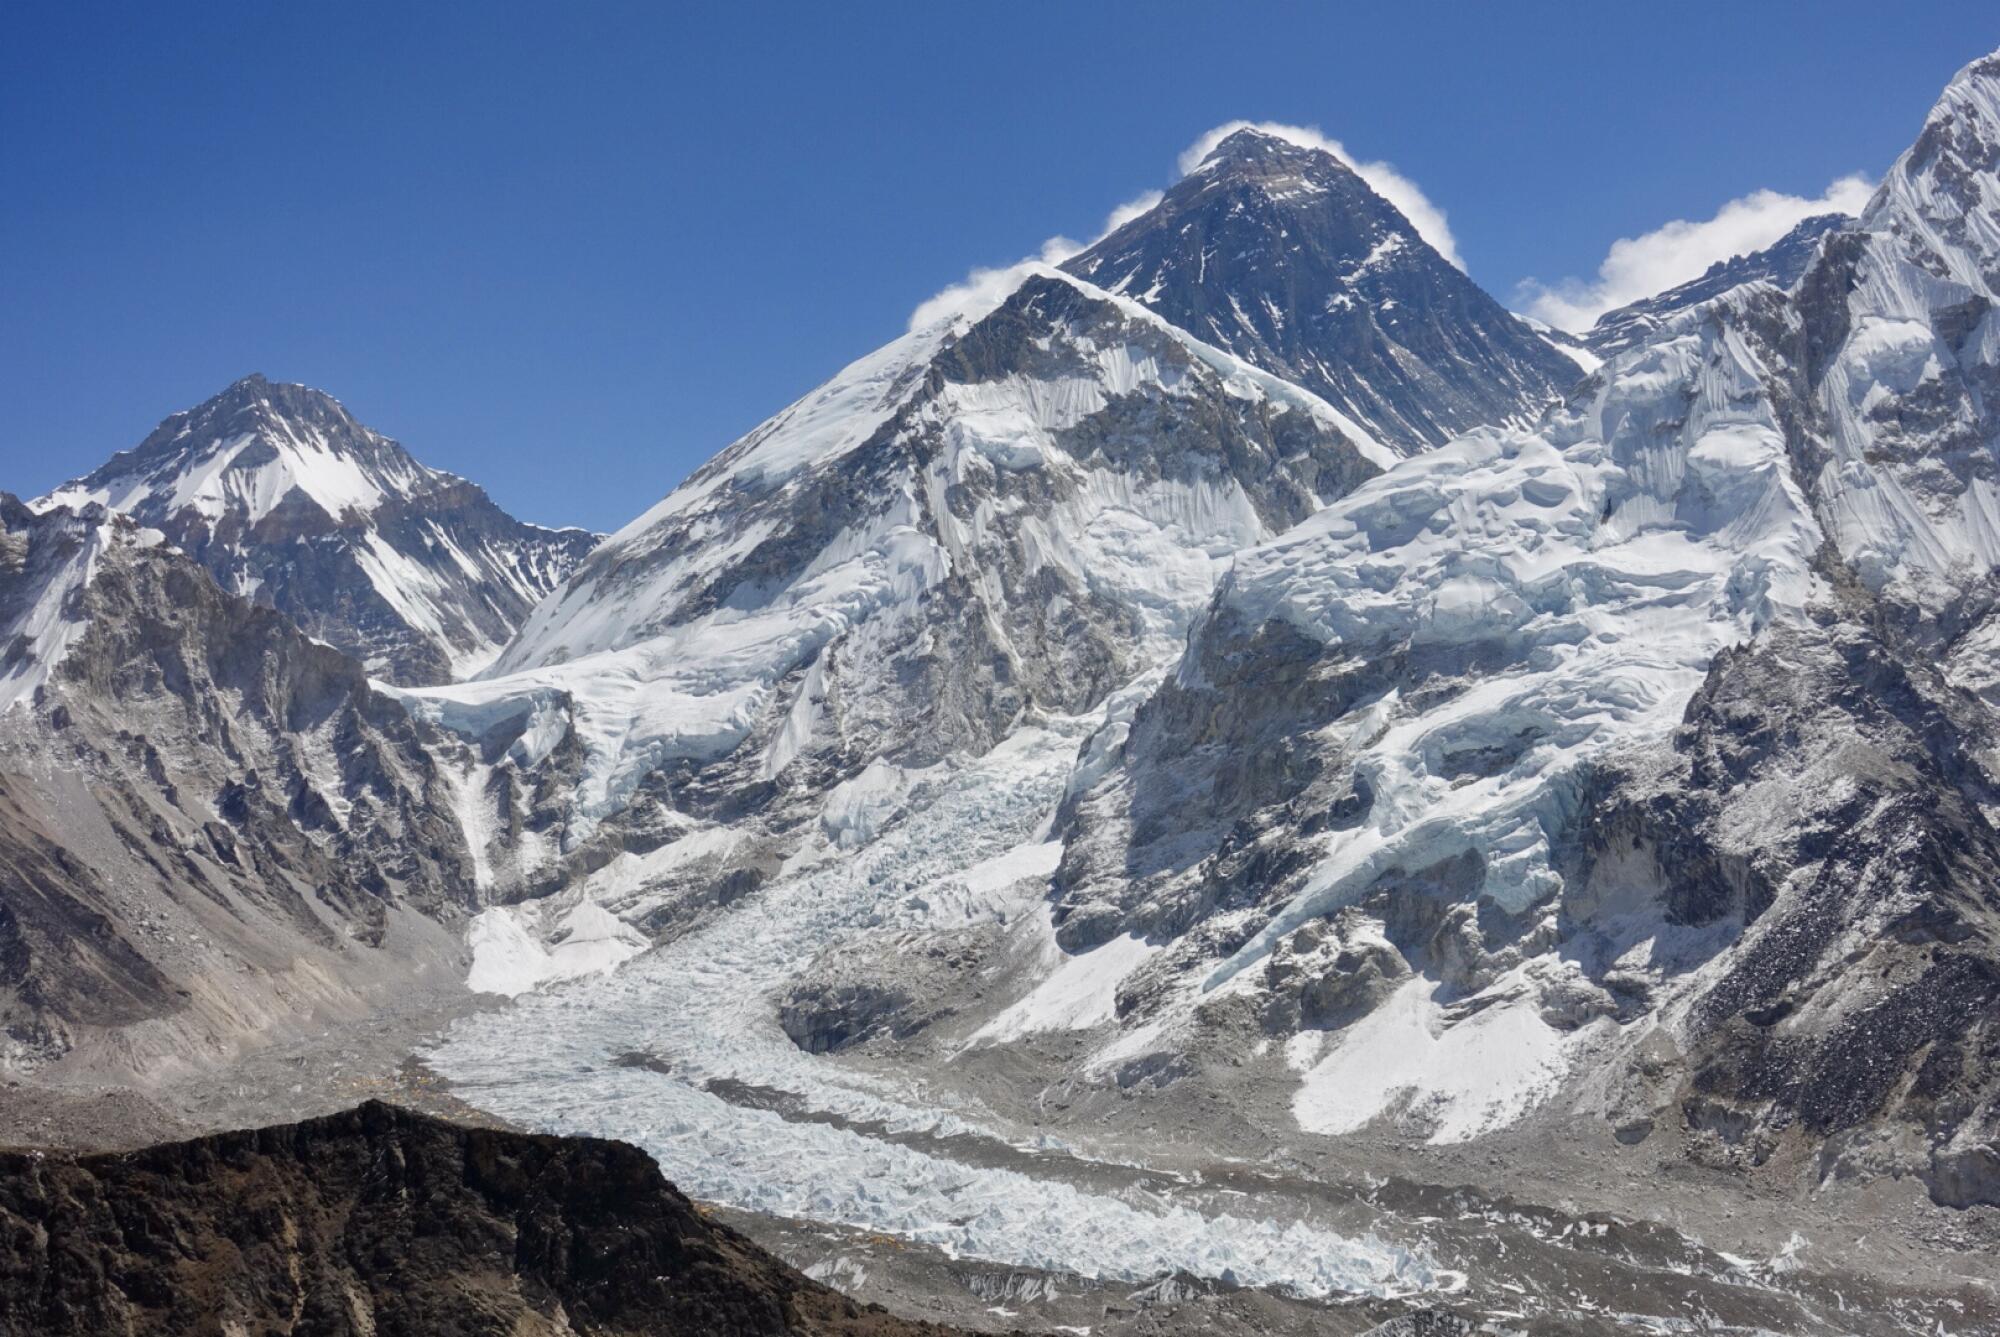 Snow and ice on the approach to Mt. Everest, with clouds forming off its peaks